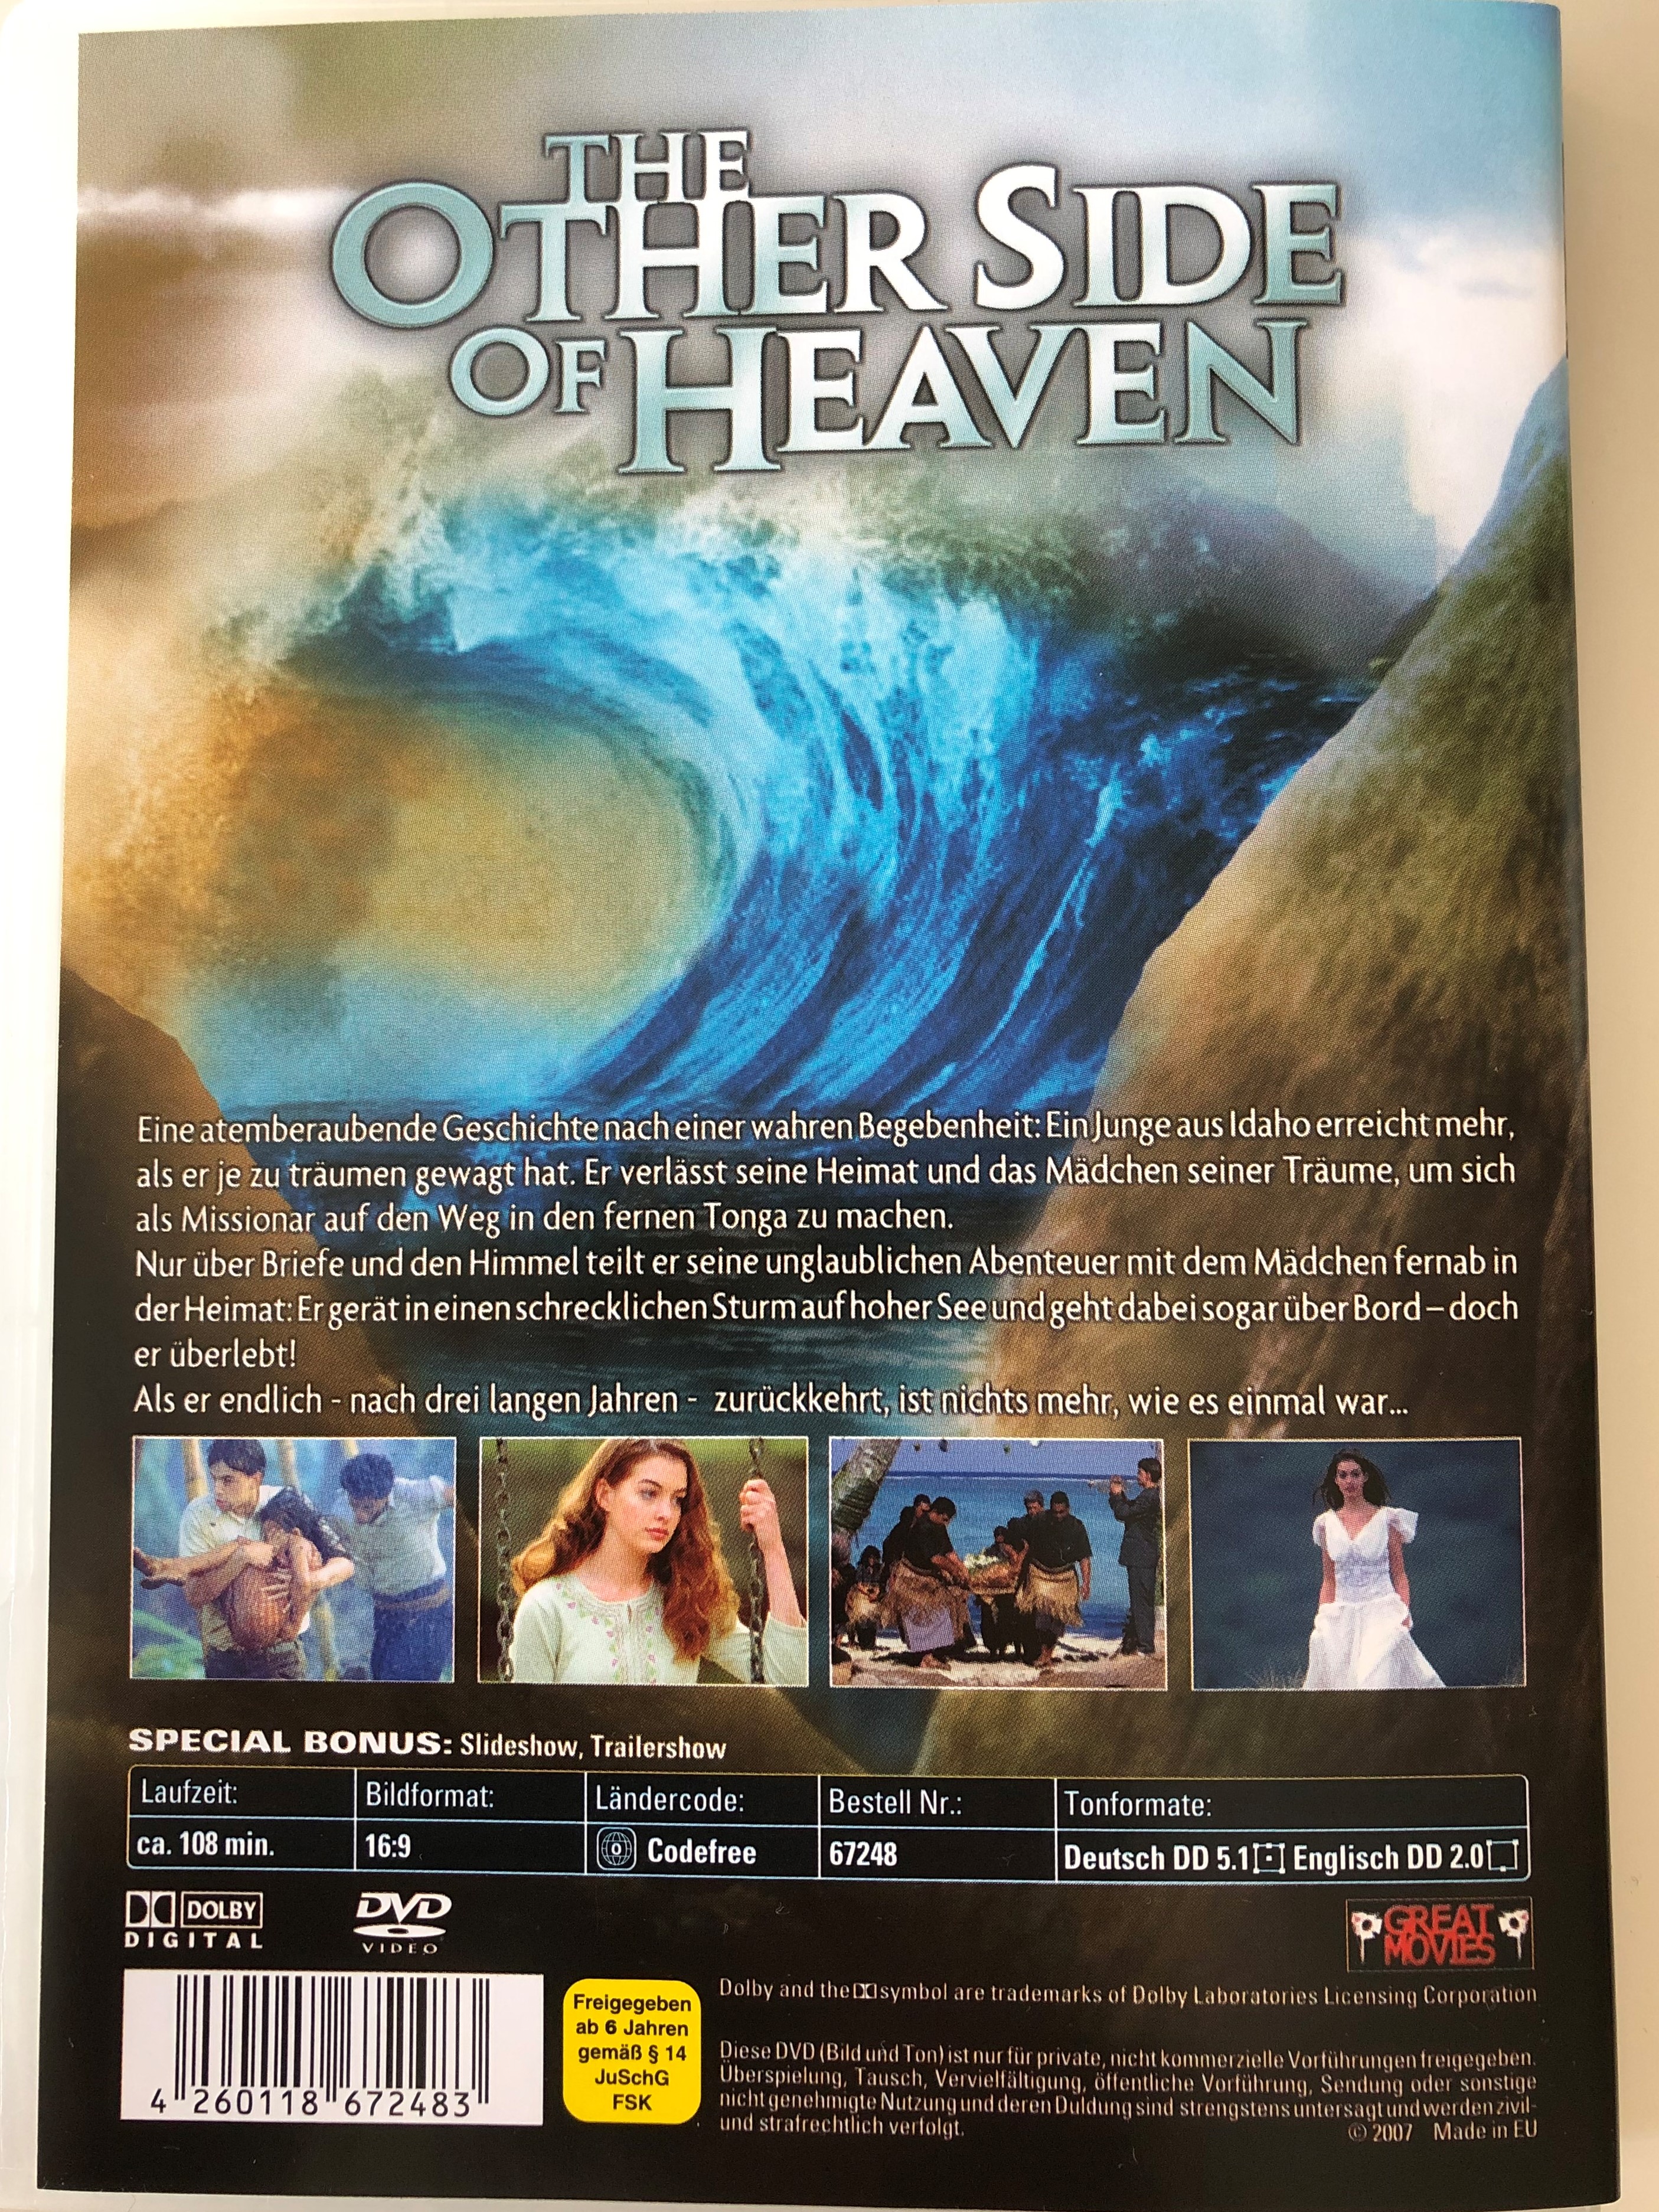 the-other-side-of-heaven-dvd-2001-german-edition-2.jpg